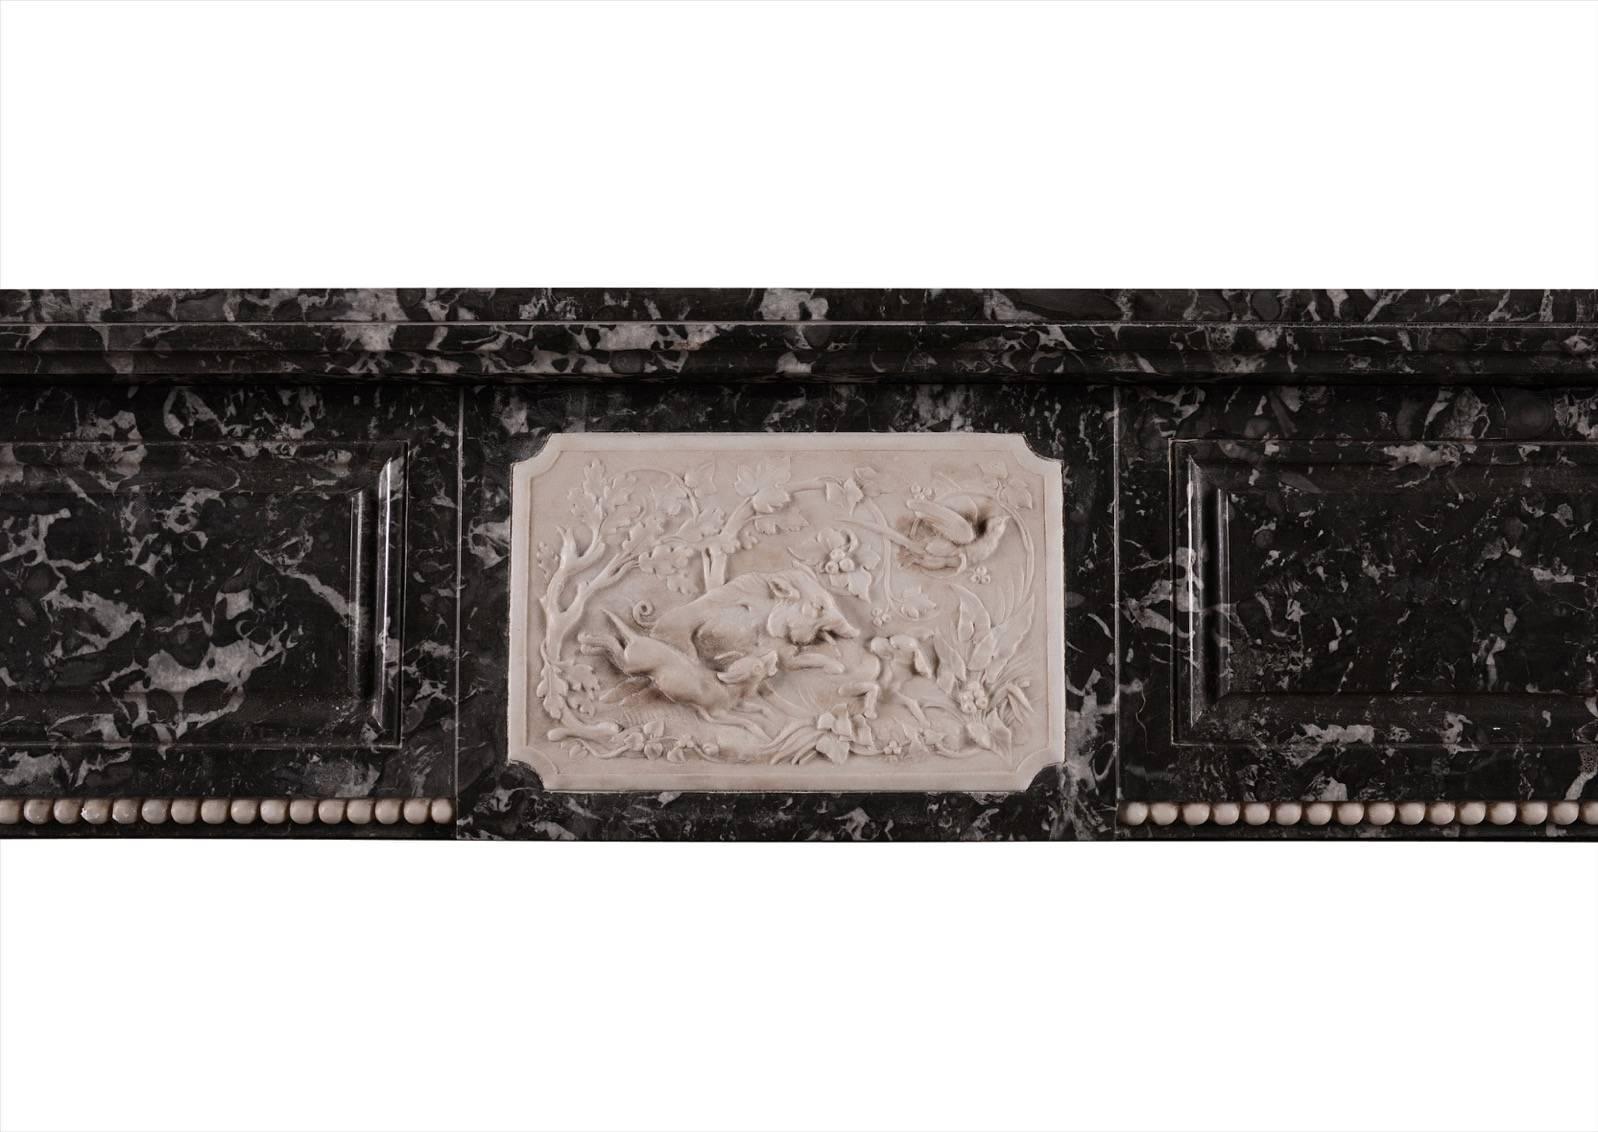 A charming Louis XVI fireplace in Saint Anne des Pyrenees marble with delicate white carvings. The centre panel with hunting scene of wild boar, dogs, birds and flowers. The jambs and side blocking with finely carved oak leaves and acorns. Carved